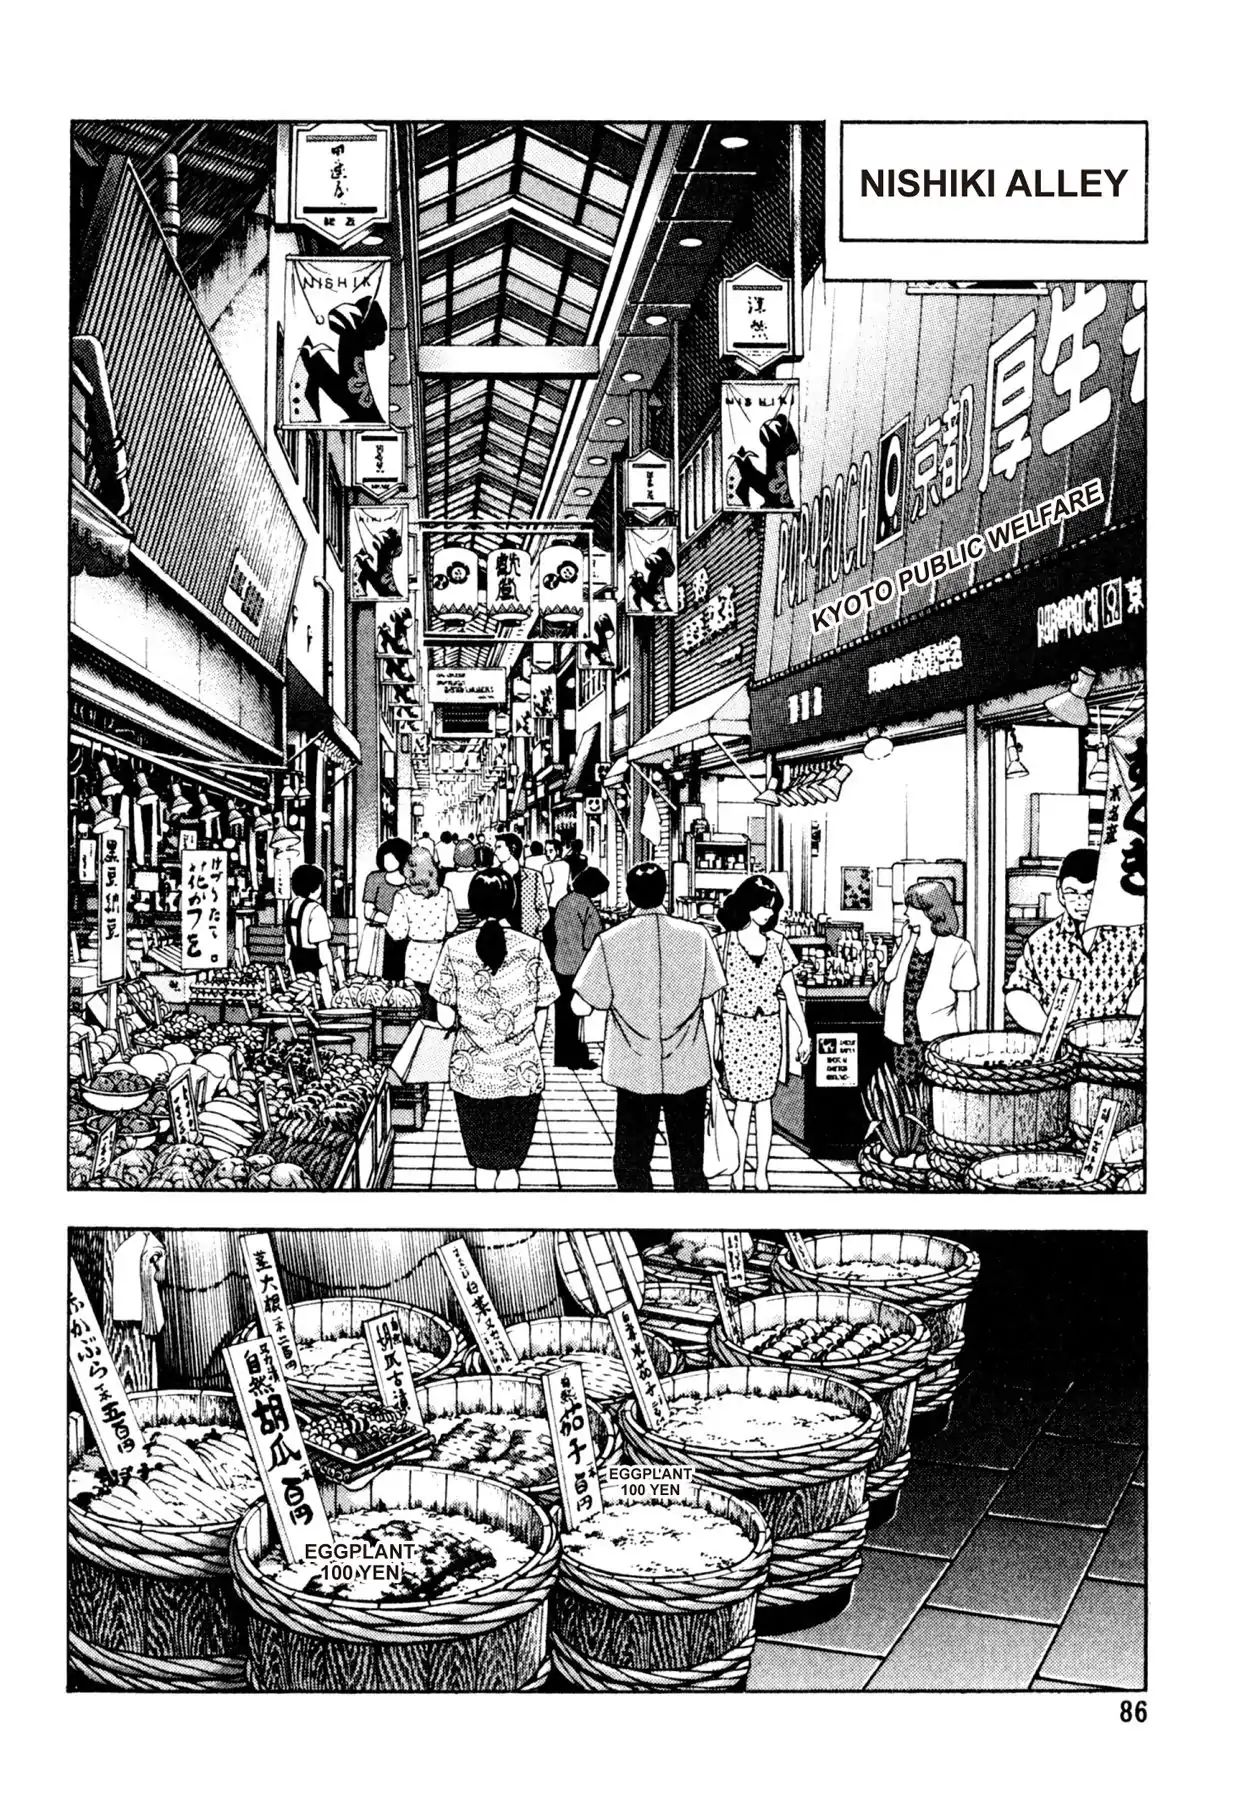 Shoku King VOL.16 CHAPTER 139: THE TWO FOOD STANDS